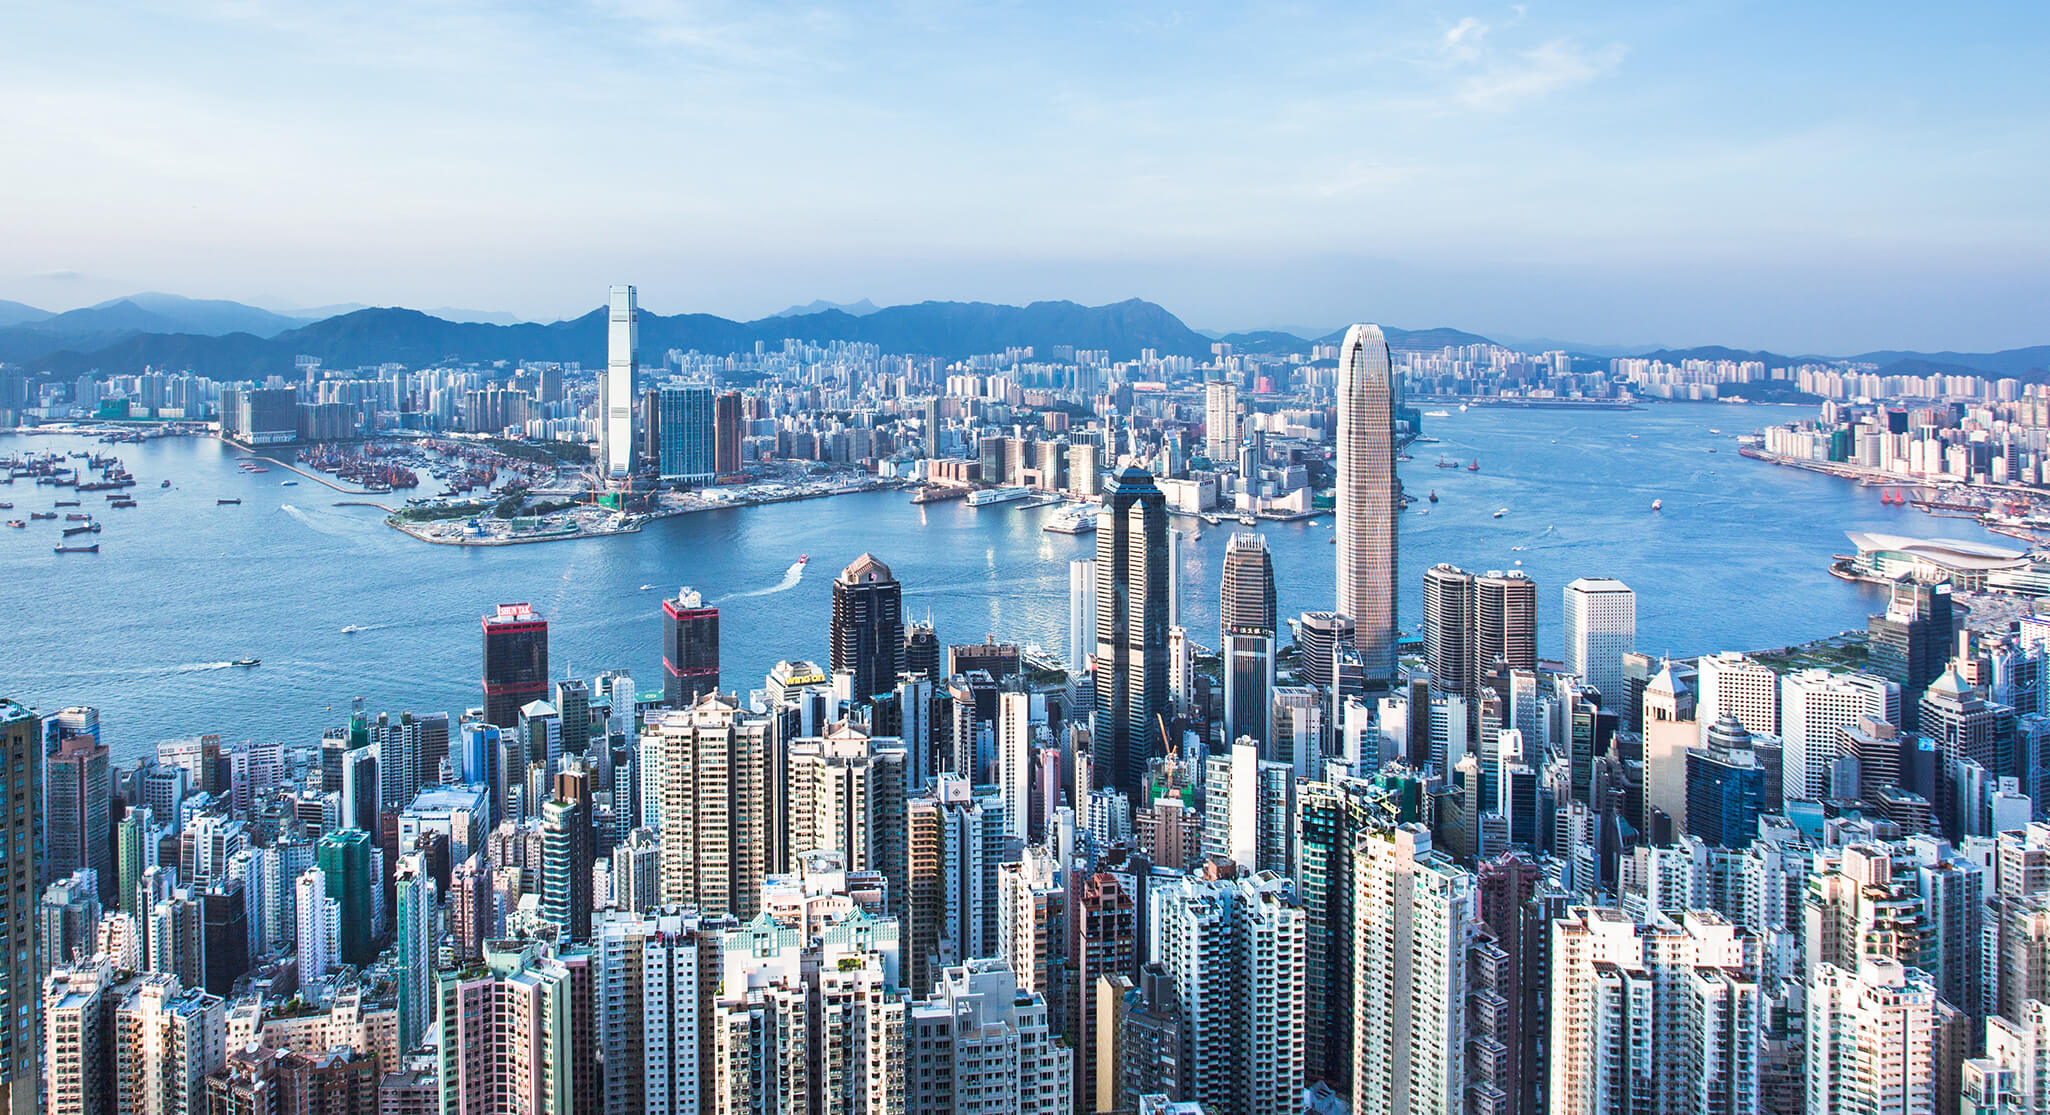 Hong Kong’s new dual counter listings model: Challenges and opportunities  for brokers